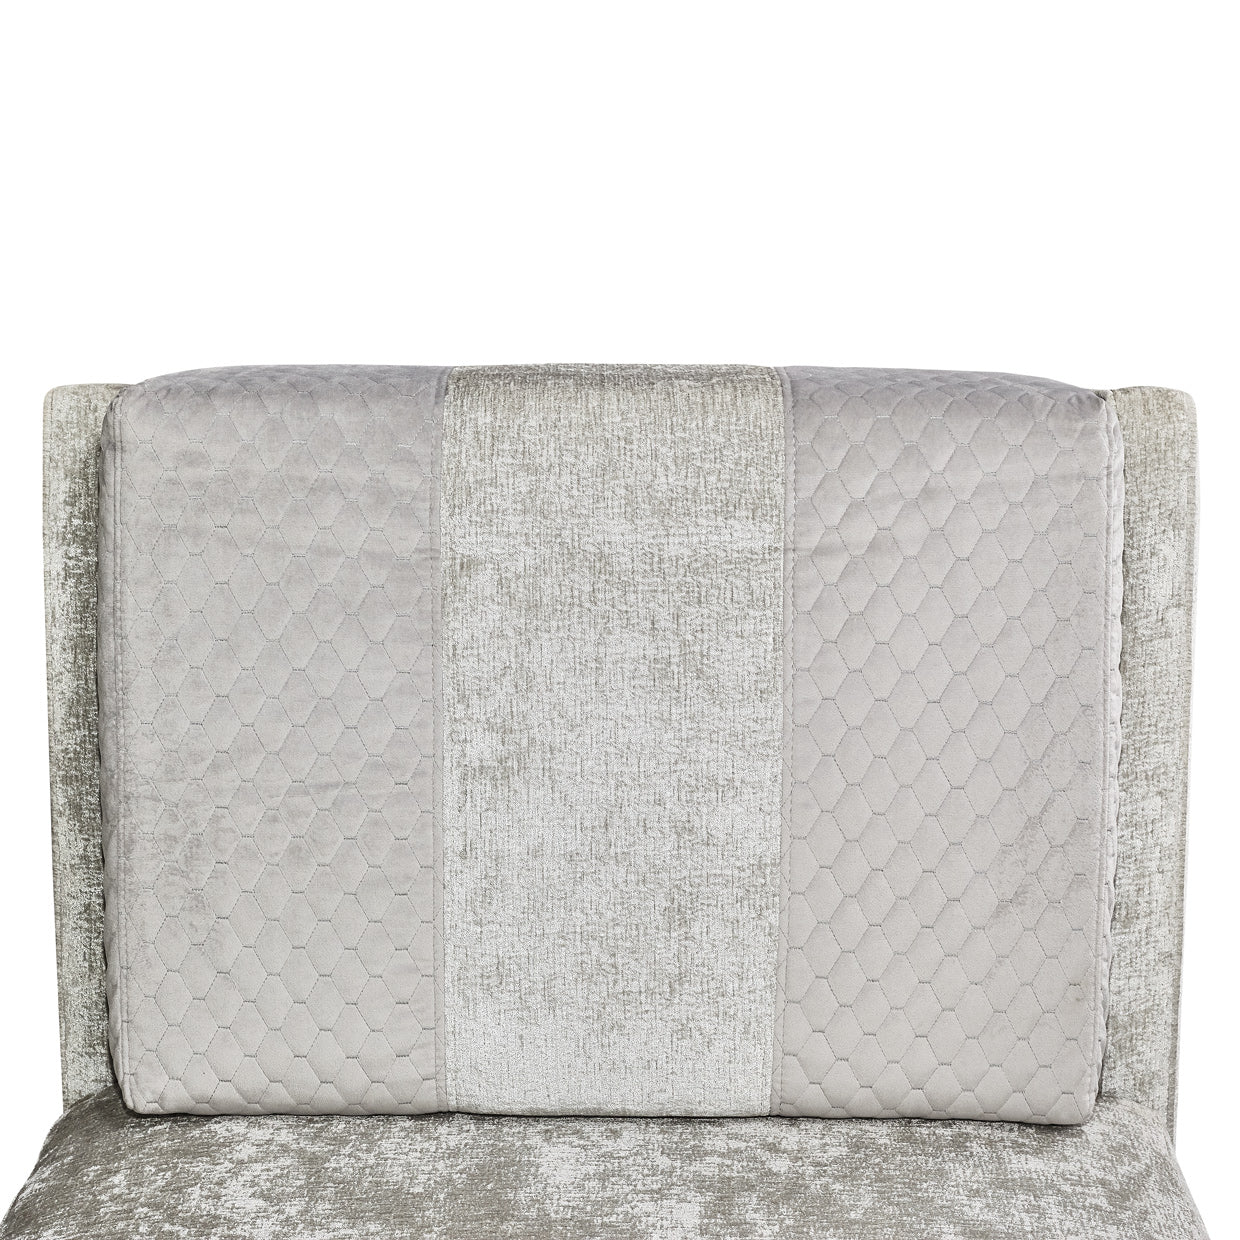 Lanna Chaise, Tailored details, Soft neutrals, Chenille fabric, Luxury cushions, Velvet, honeycomb pattern, Everyday lounging, Home style, dream art, Michael amini , pillow